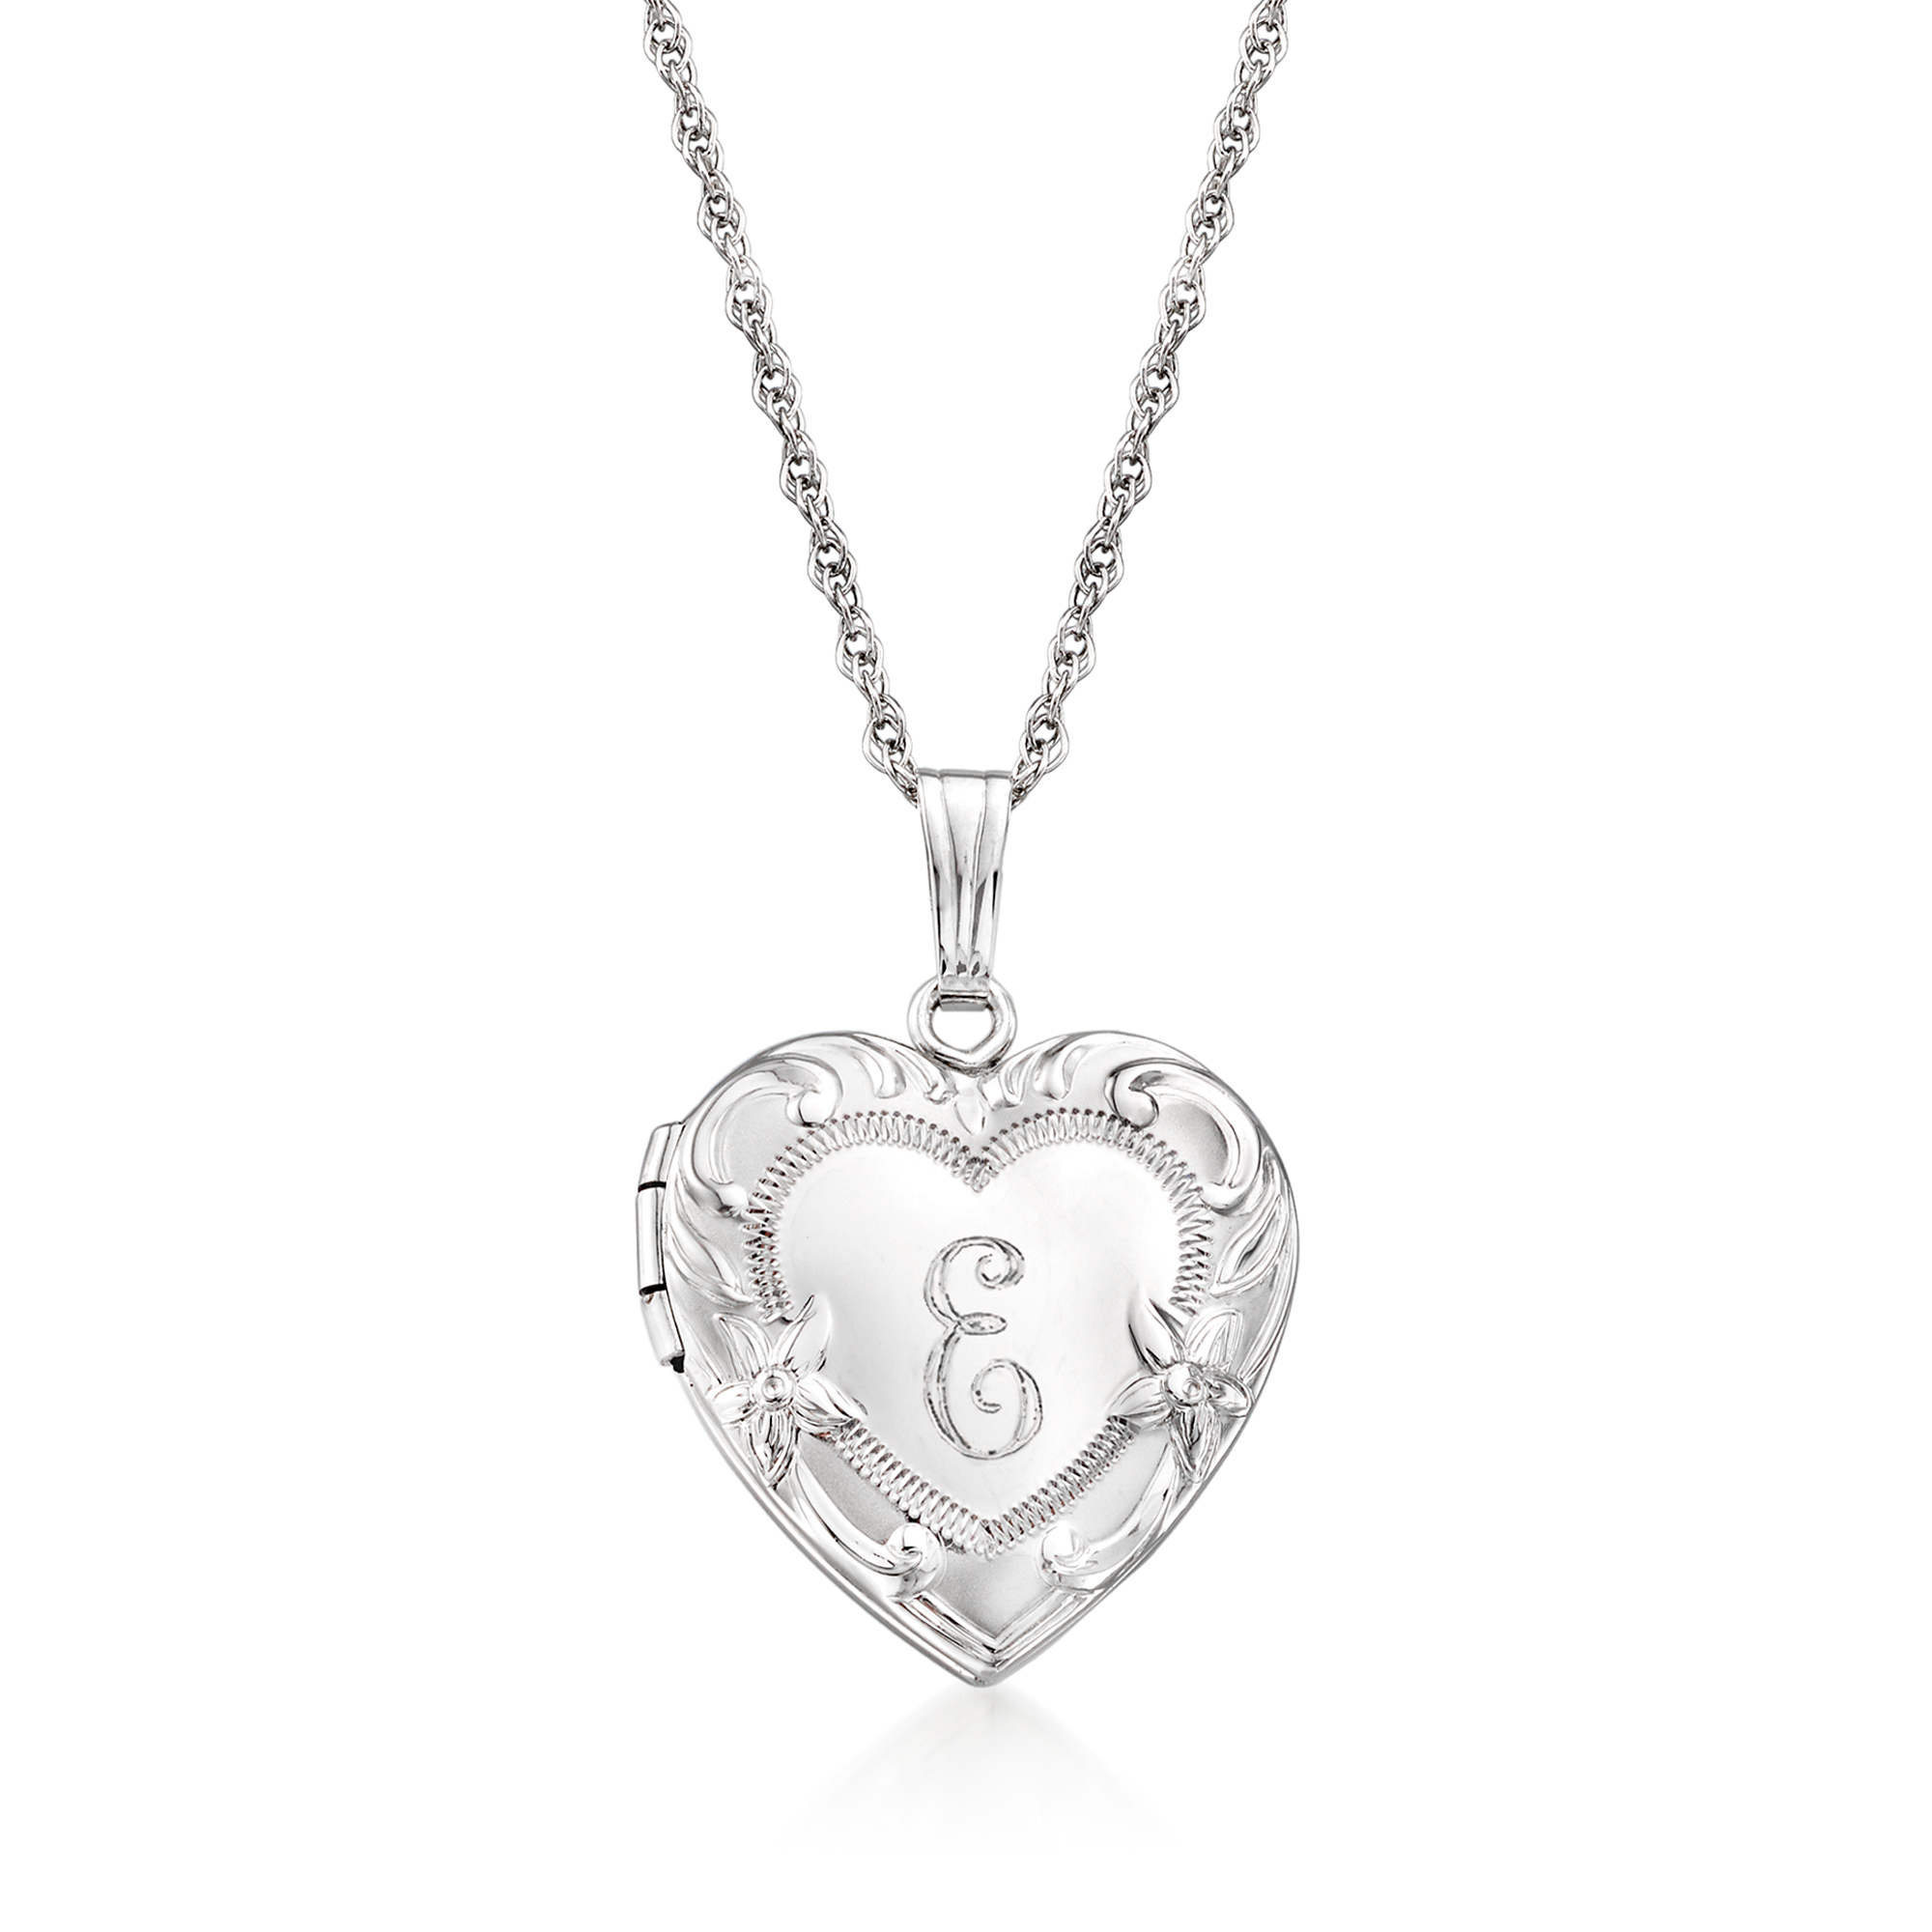 Sterling Silver Personalized Heart Locket Necklace | Ross-Simons